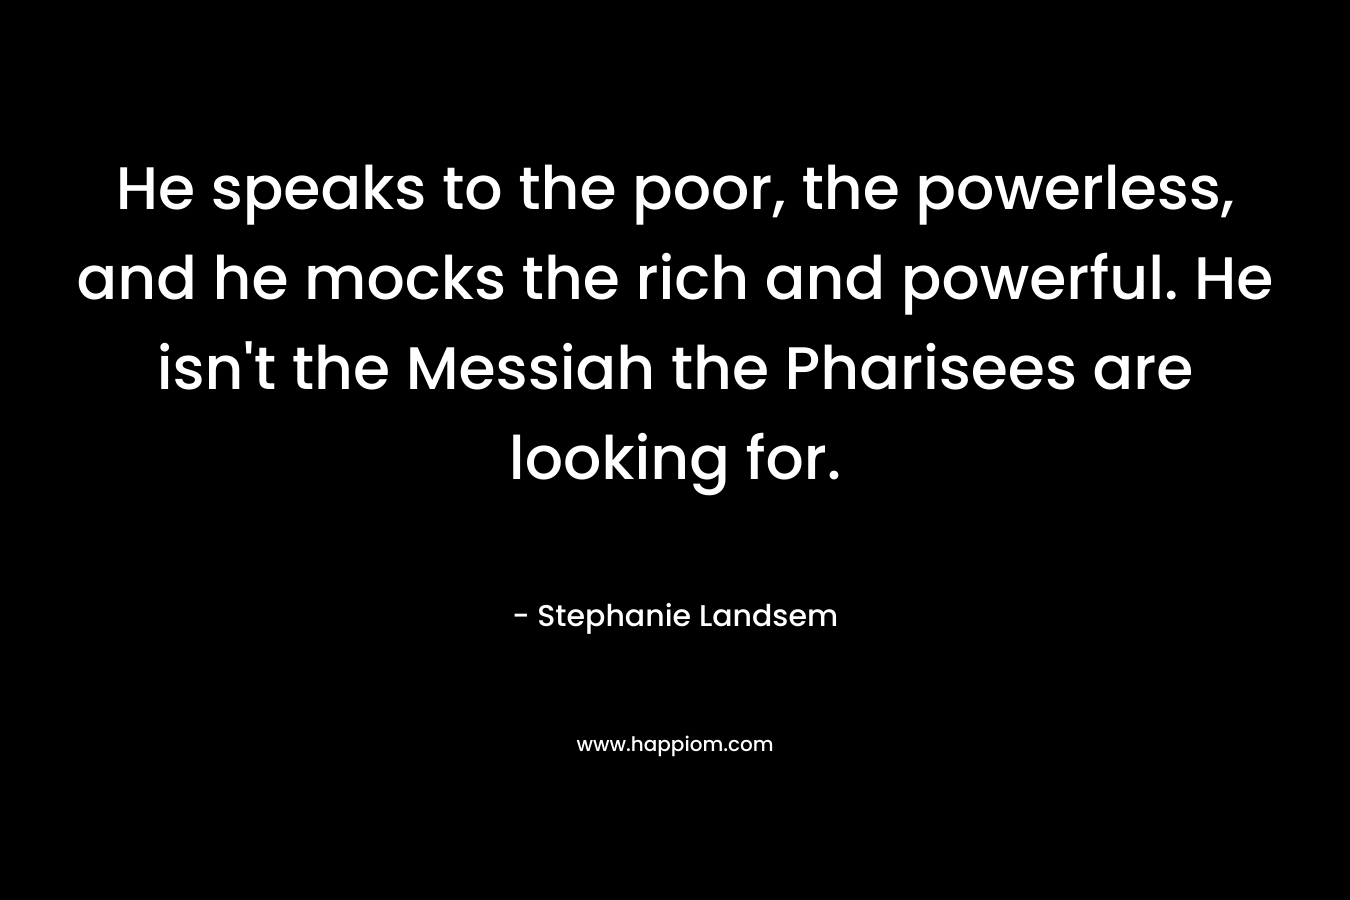 He speaks to the poor, the powerless, and he mocks the rich and powerful. He isn’t the Messiah the Pharisees are looking for. – Stephanie Landsem